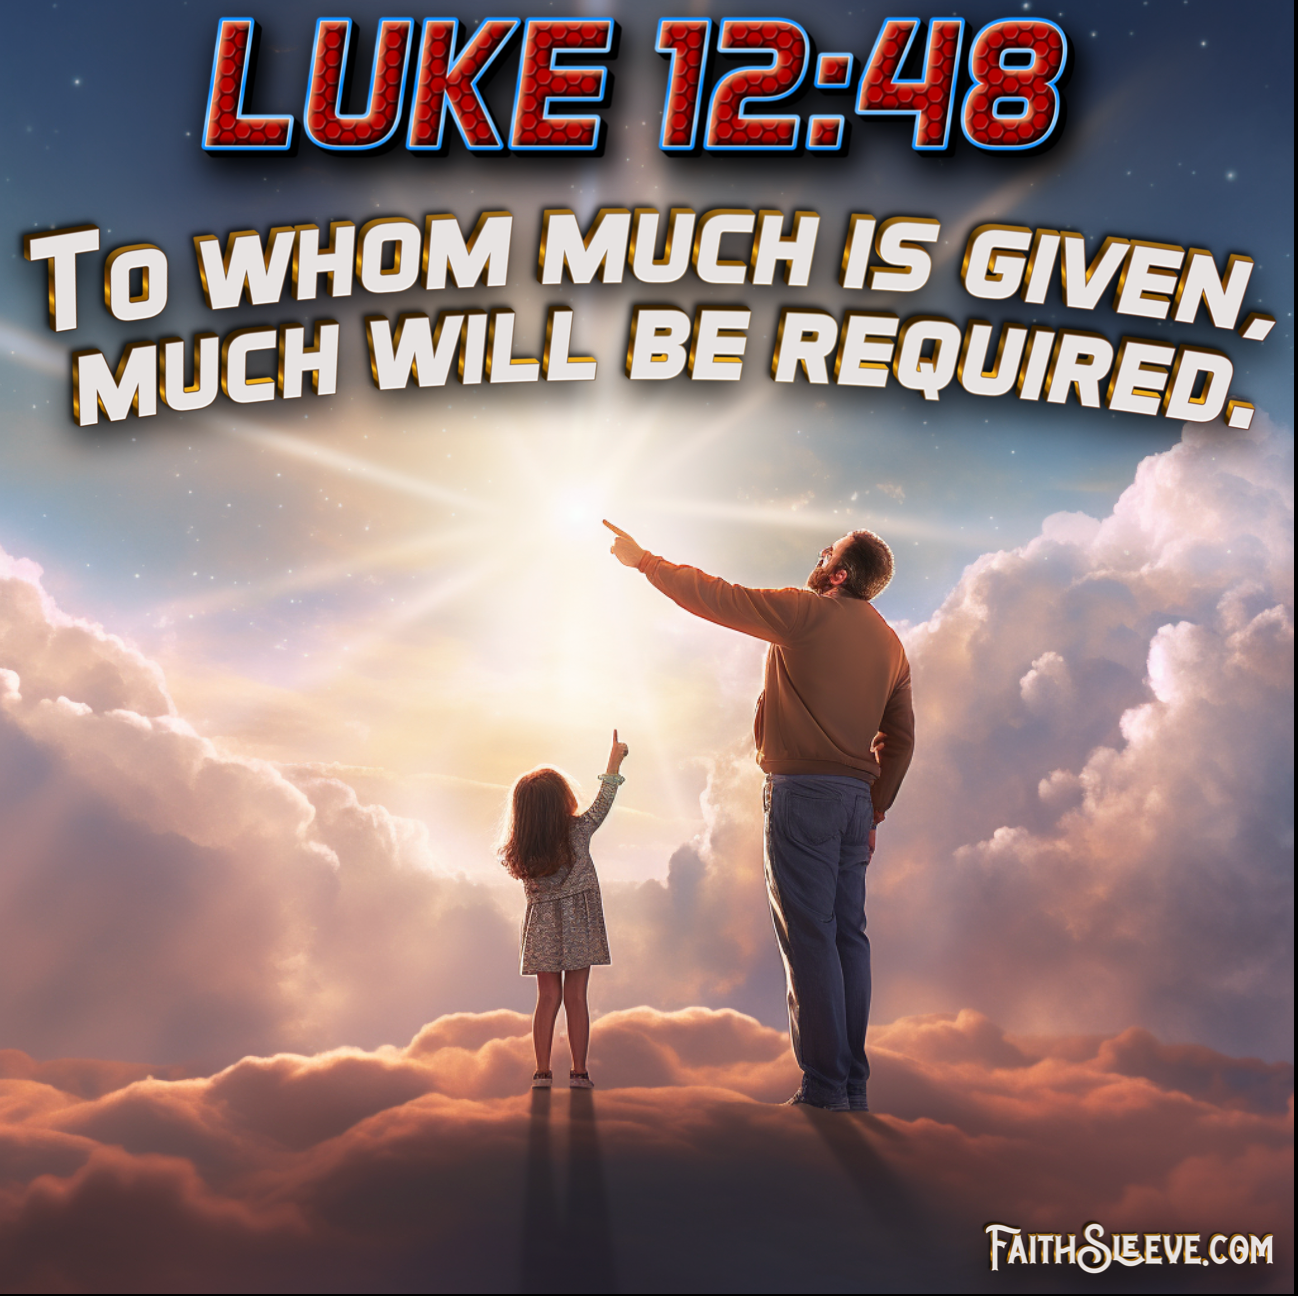 Luke 12:48 Bible Verse - Much Will Be Required